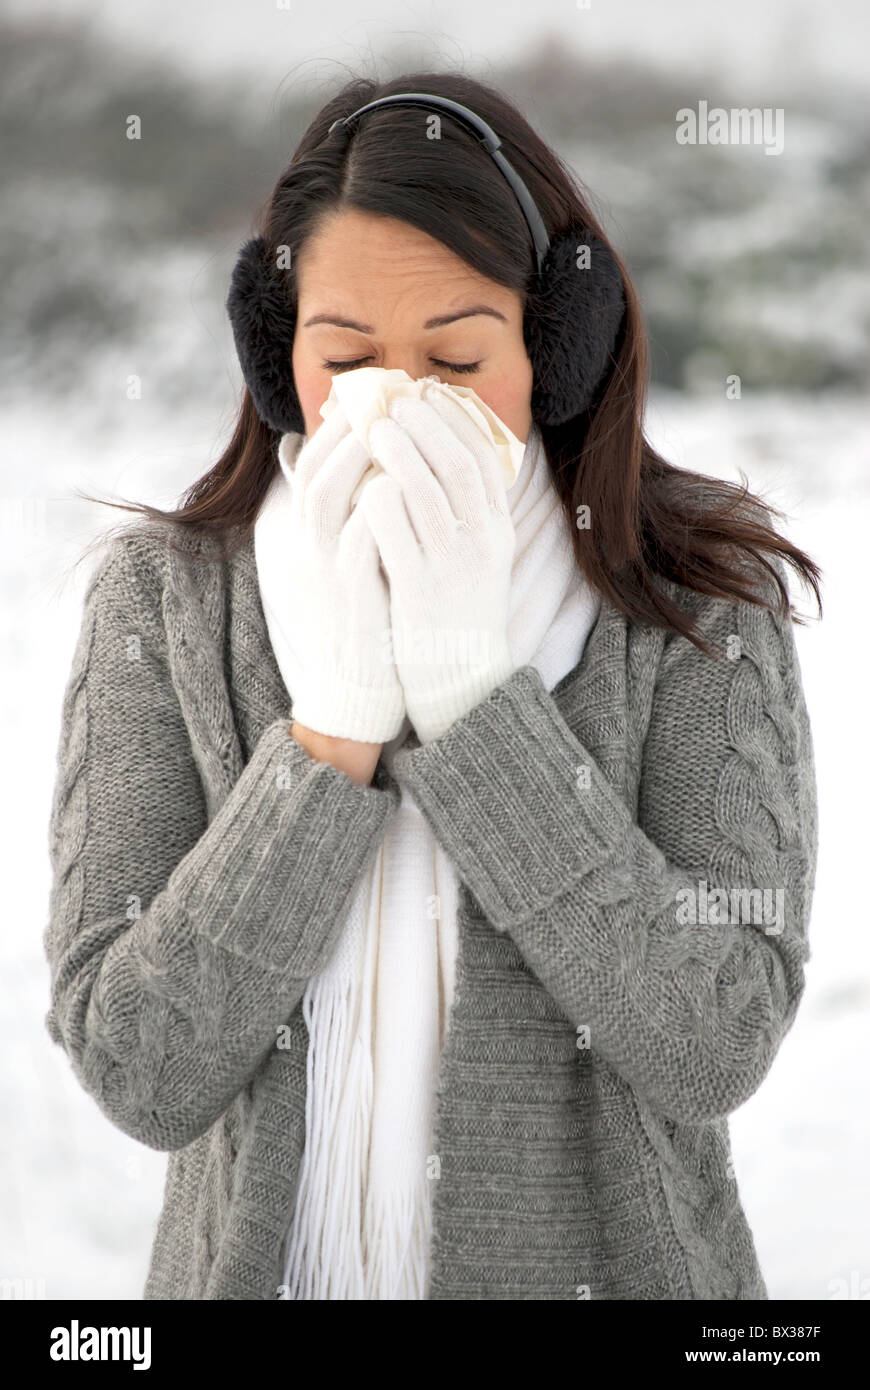 Woman blowing runny nose on cold winter day Stock Photo